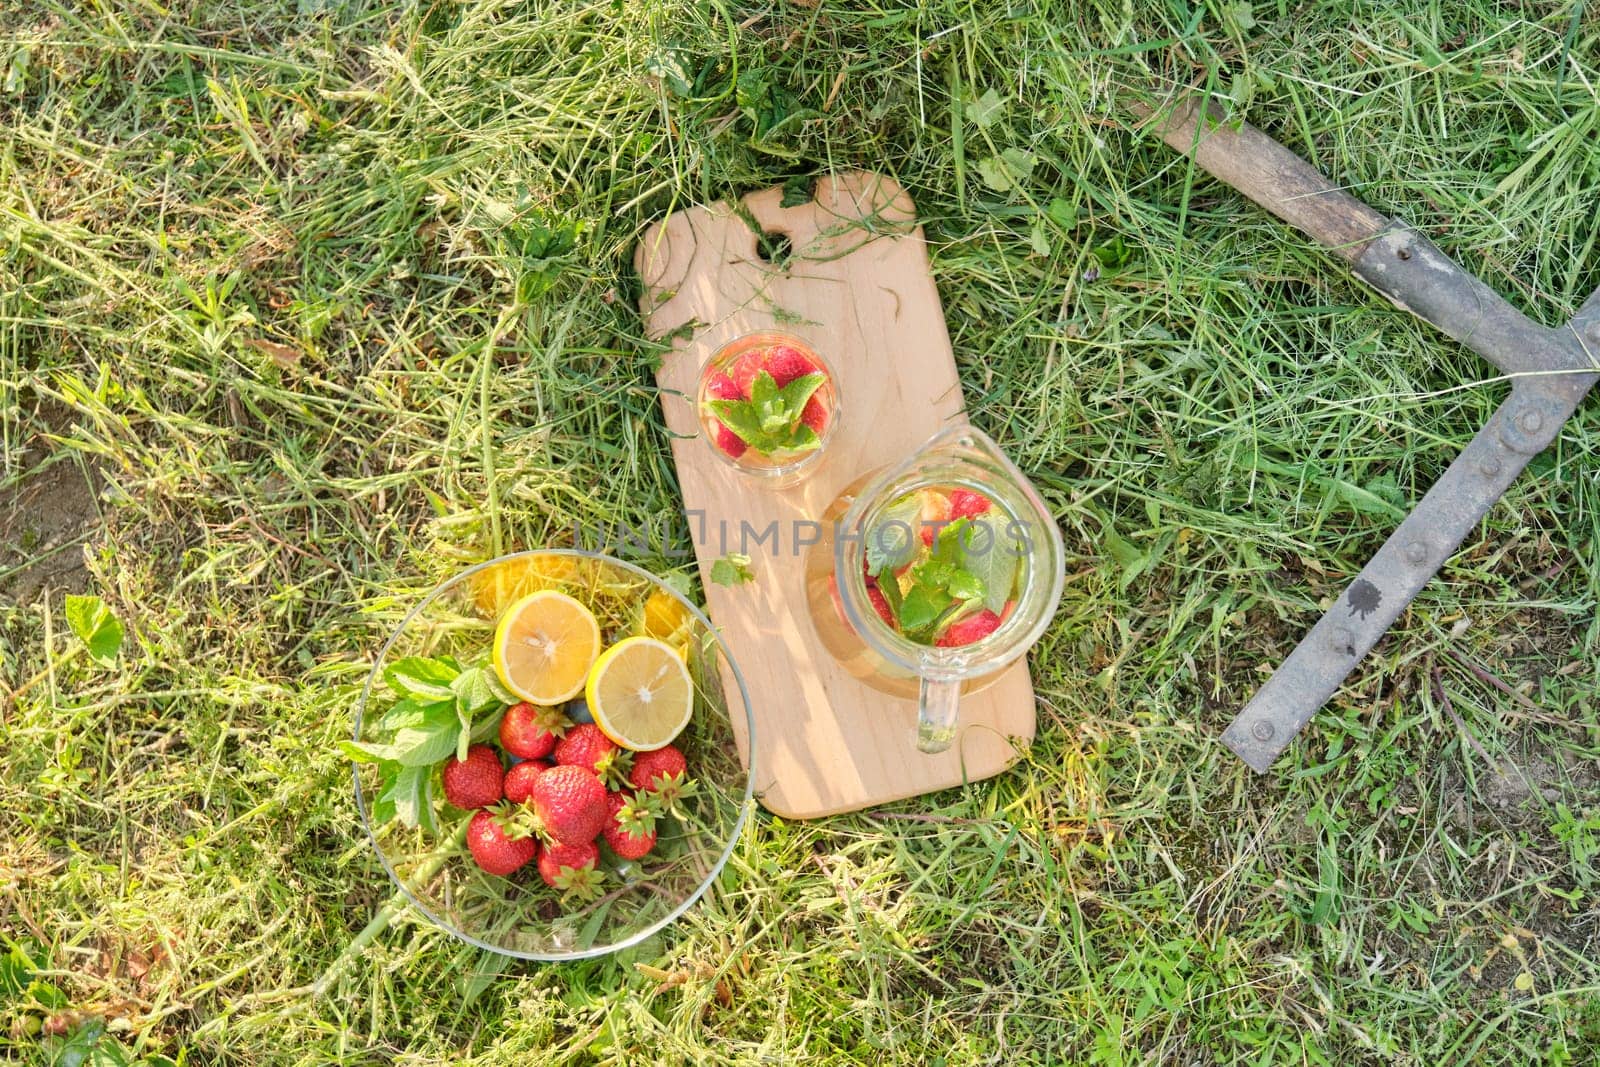 Summer refreshing natural homemade drinks, jug and glass of herbal tea with strawberries mint lemon on the grass, nature garden background, healthy lifestyle and food, golden hour